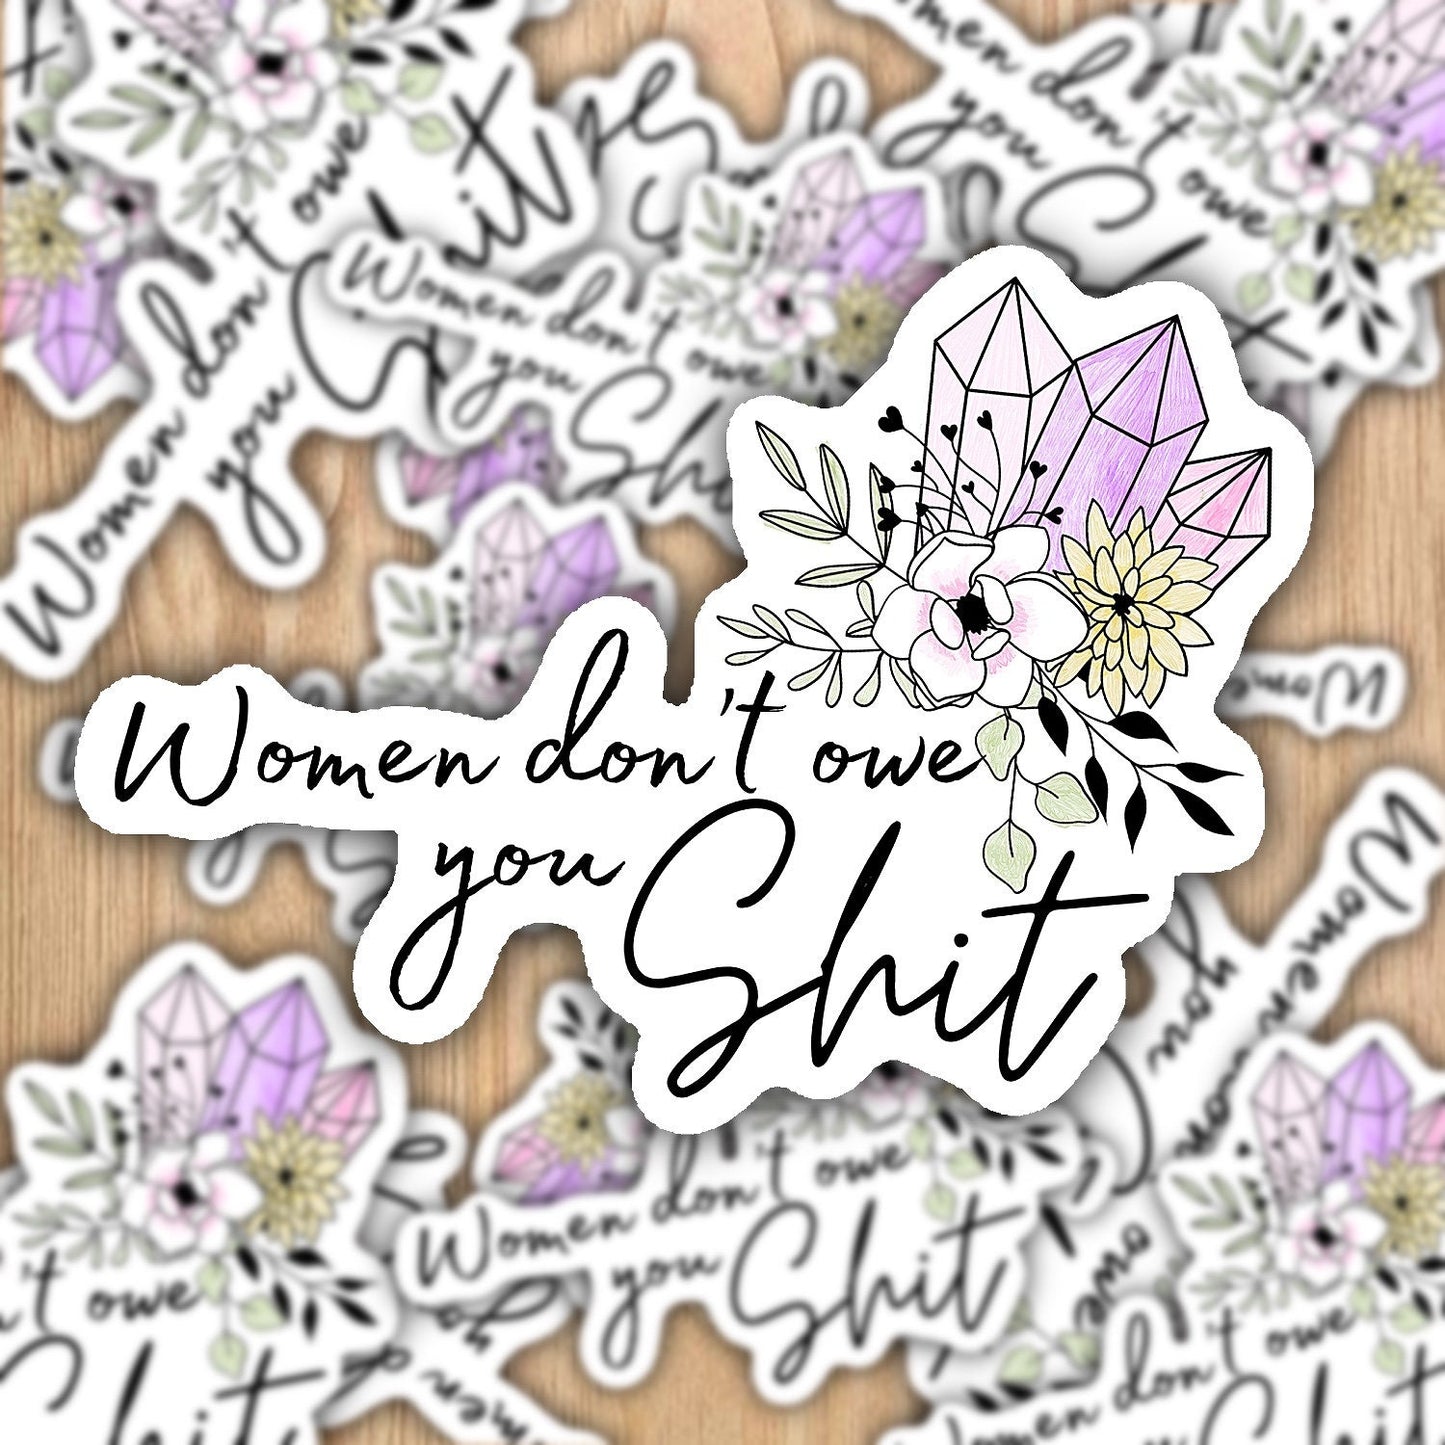 Women don't owe you shit, Womens rights, reproductive rights, abortion ban  Waterproof Vinyl sticker